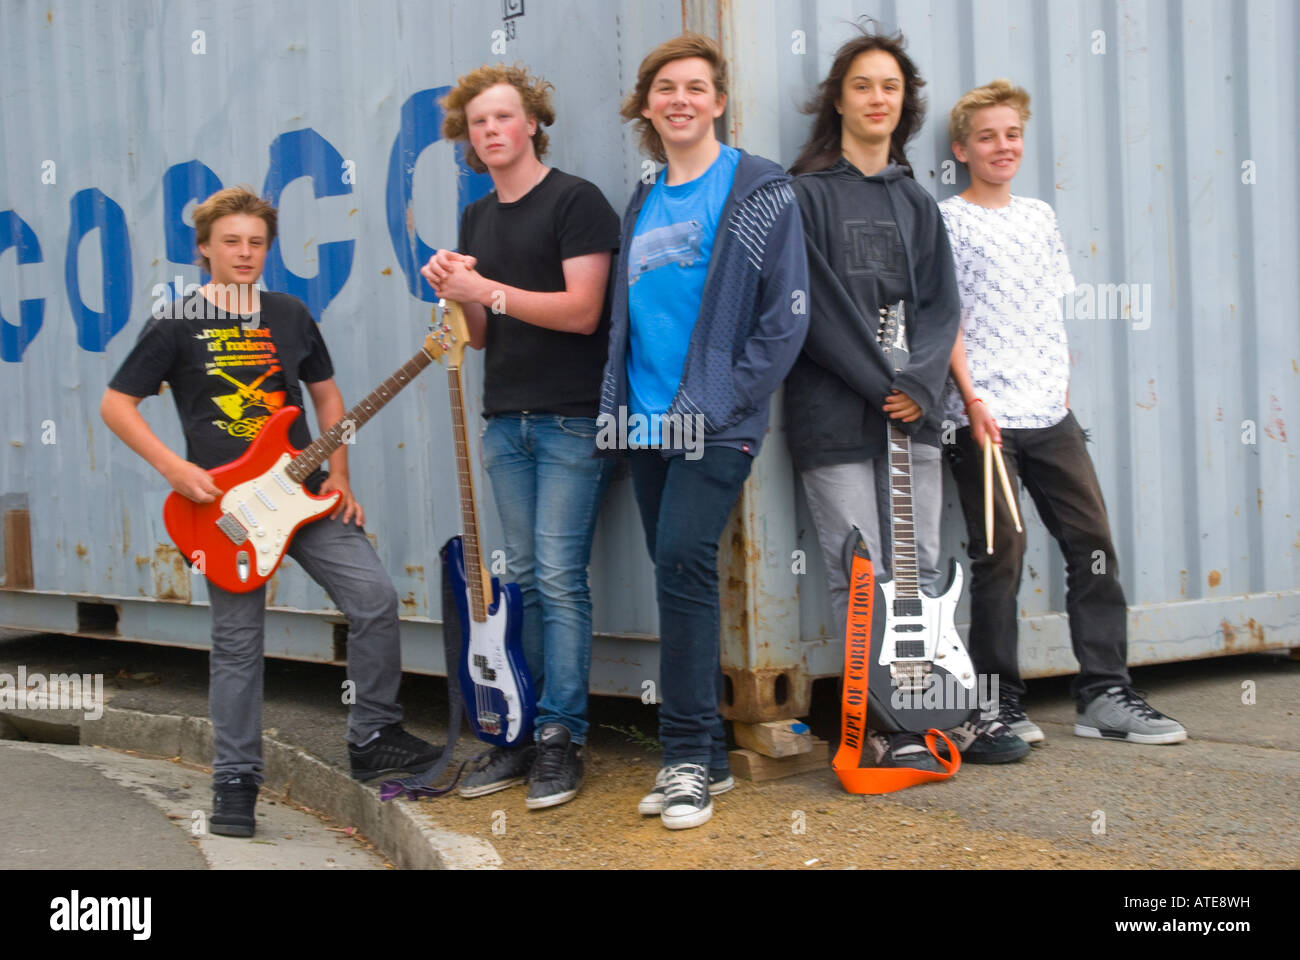 High school rock and roll band Stock Photo